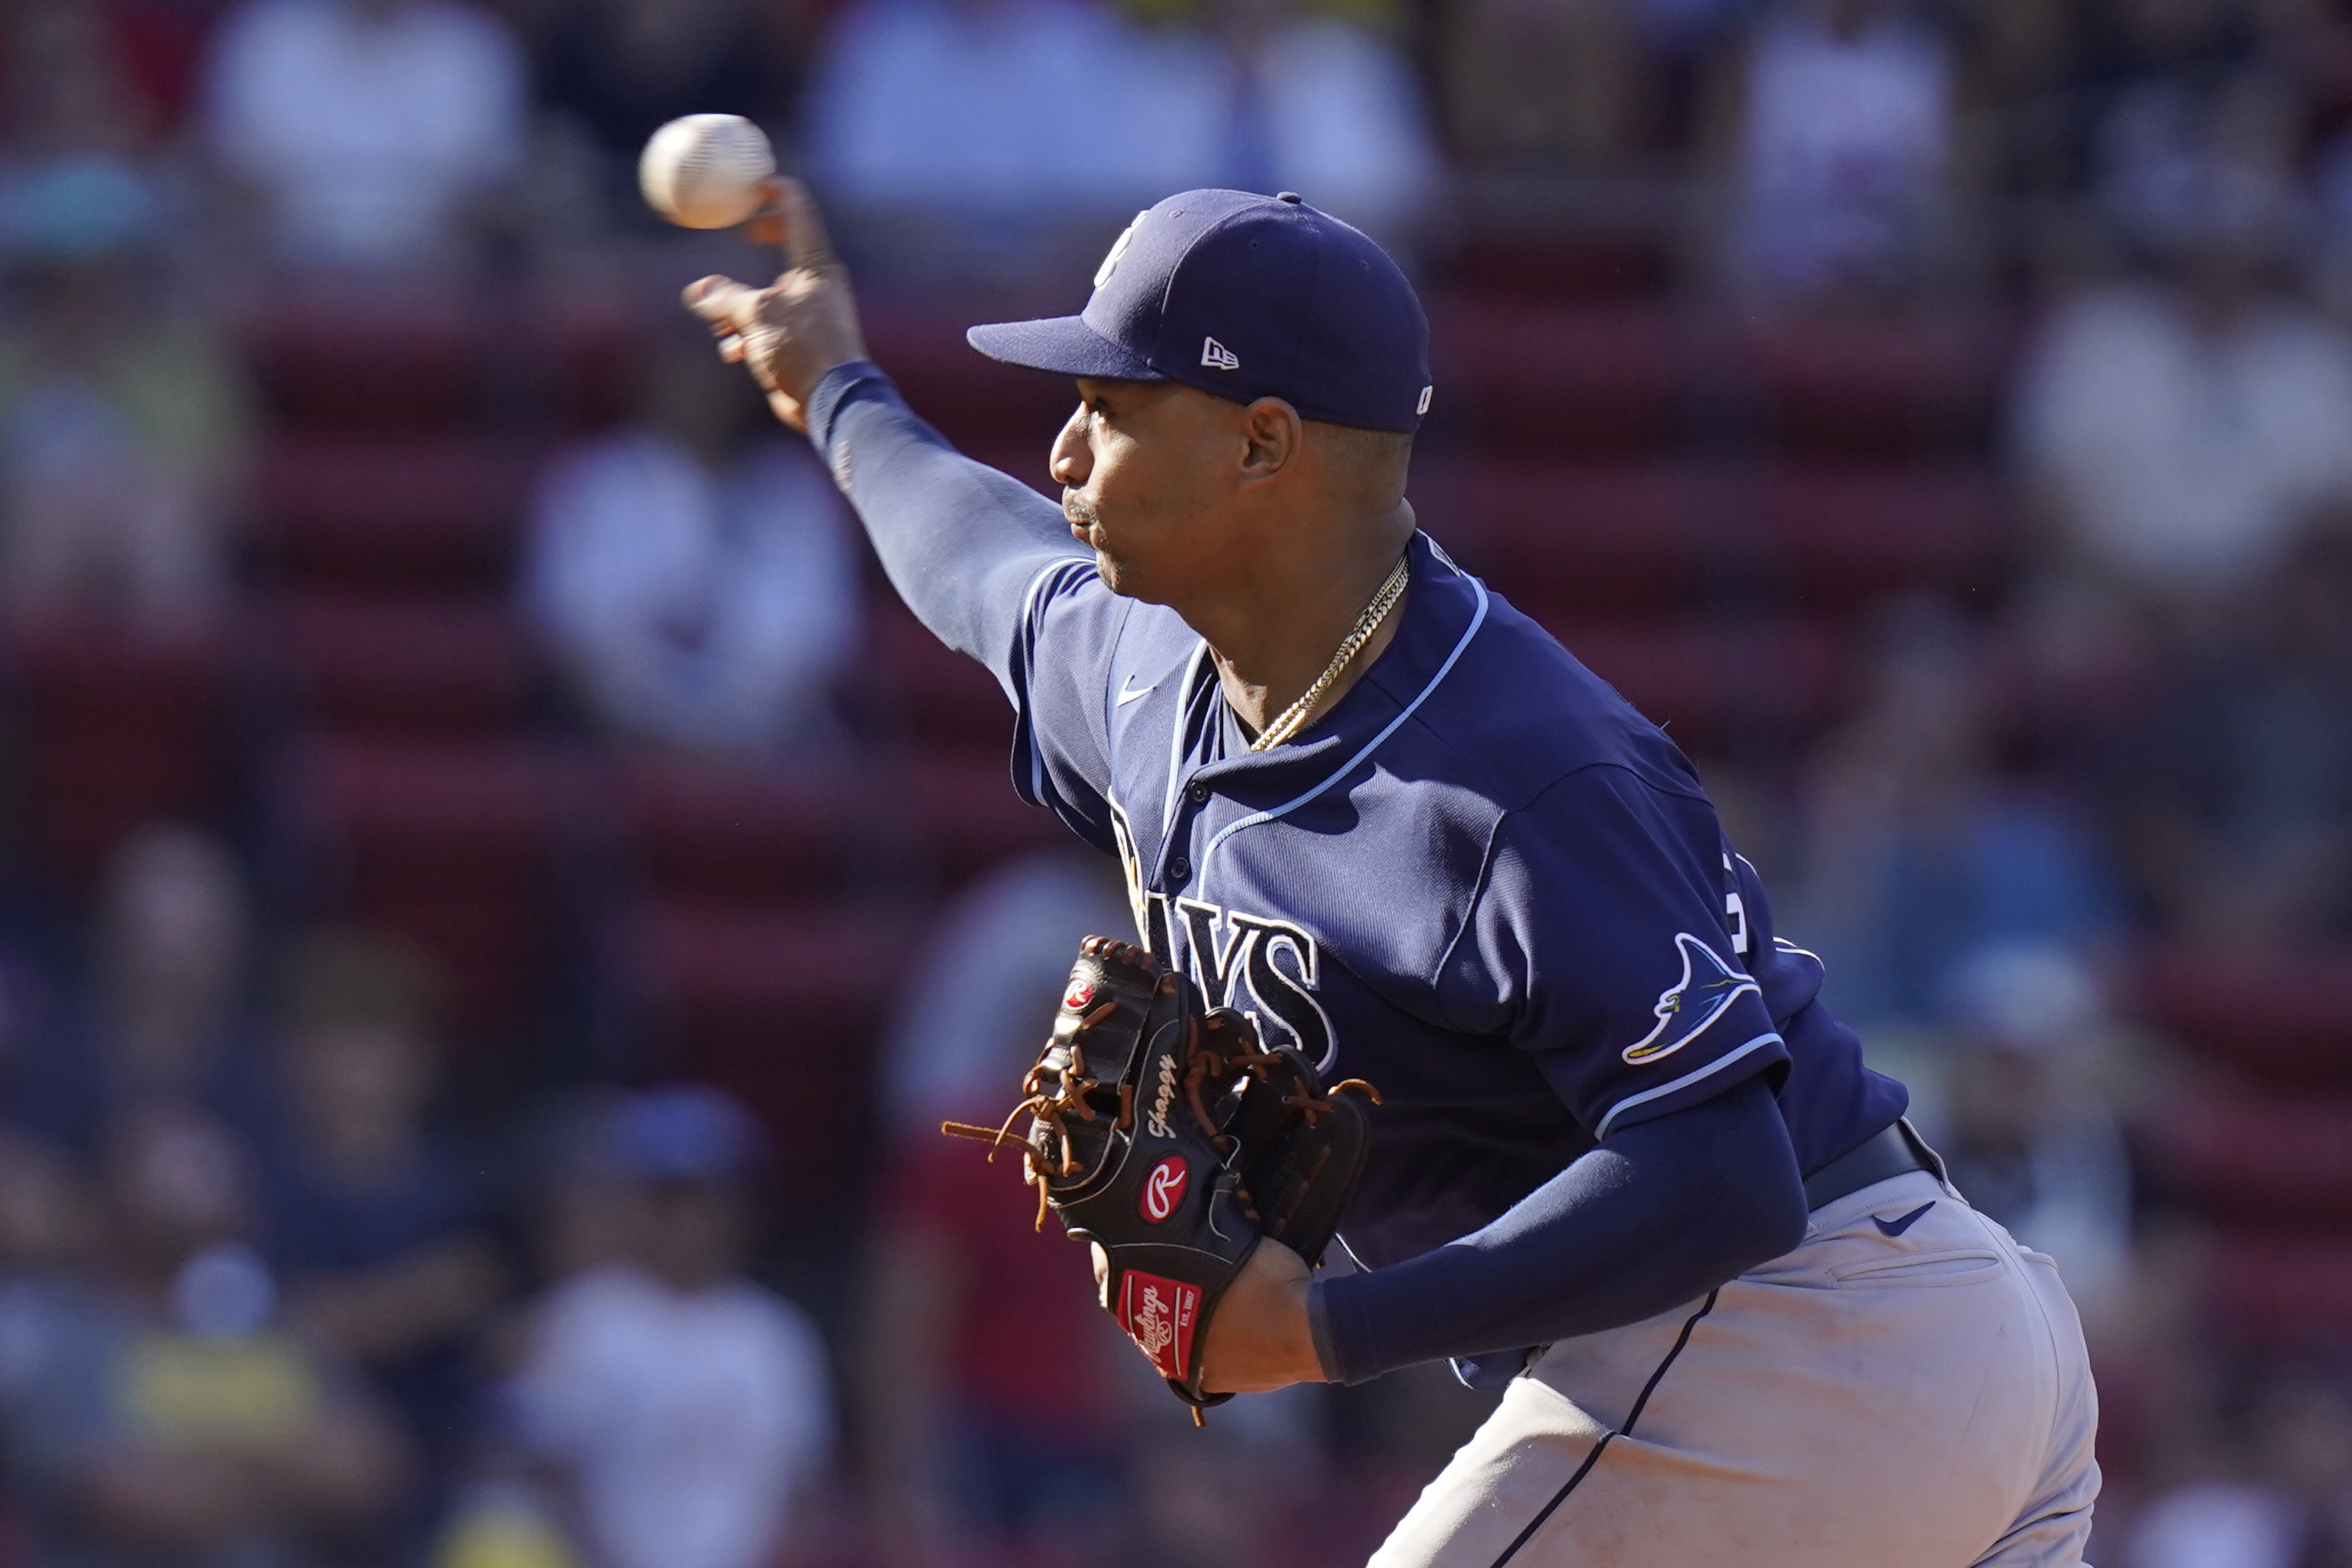 Christian Bethancourt steps up again on the mound for Rays